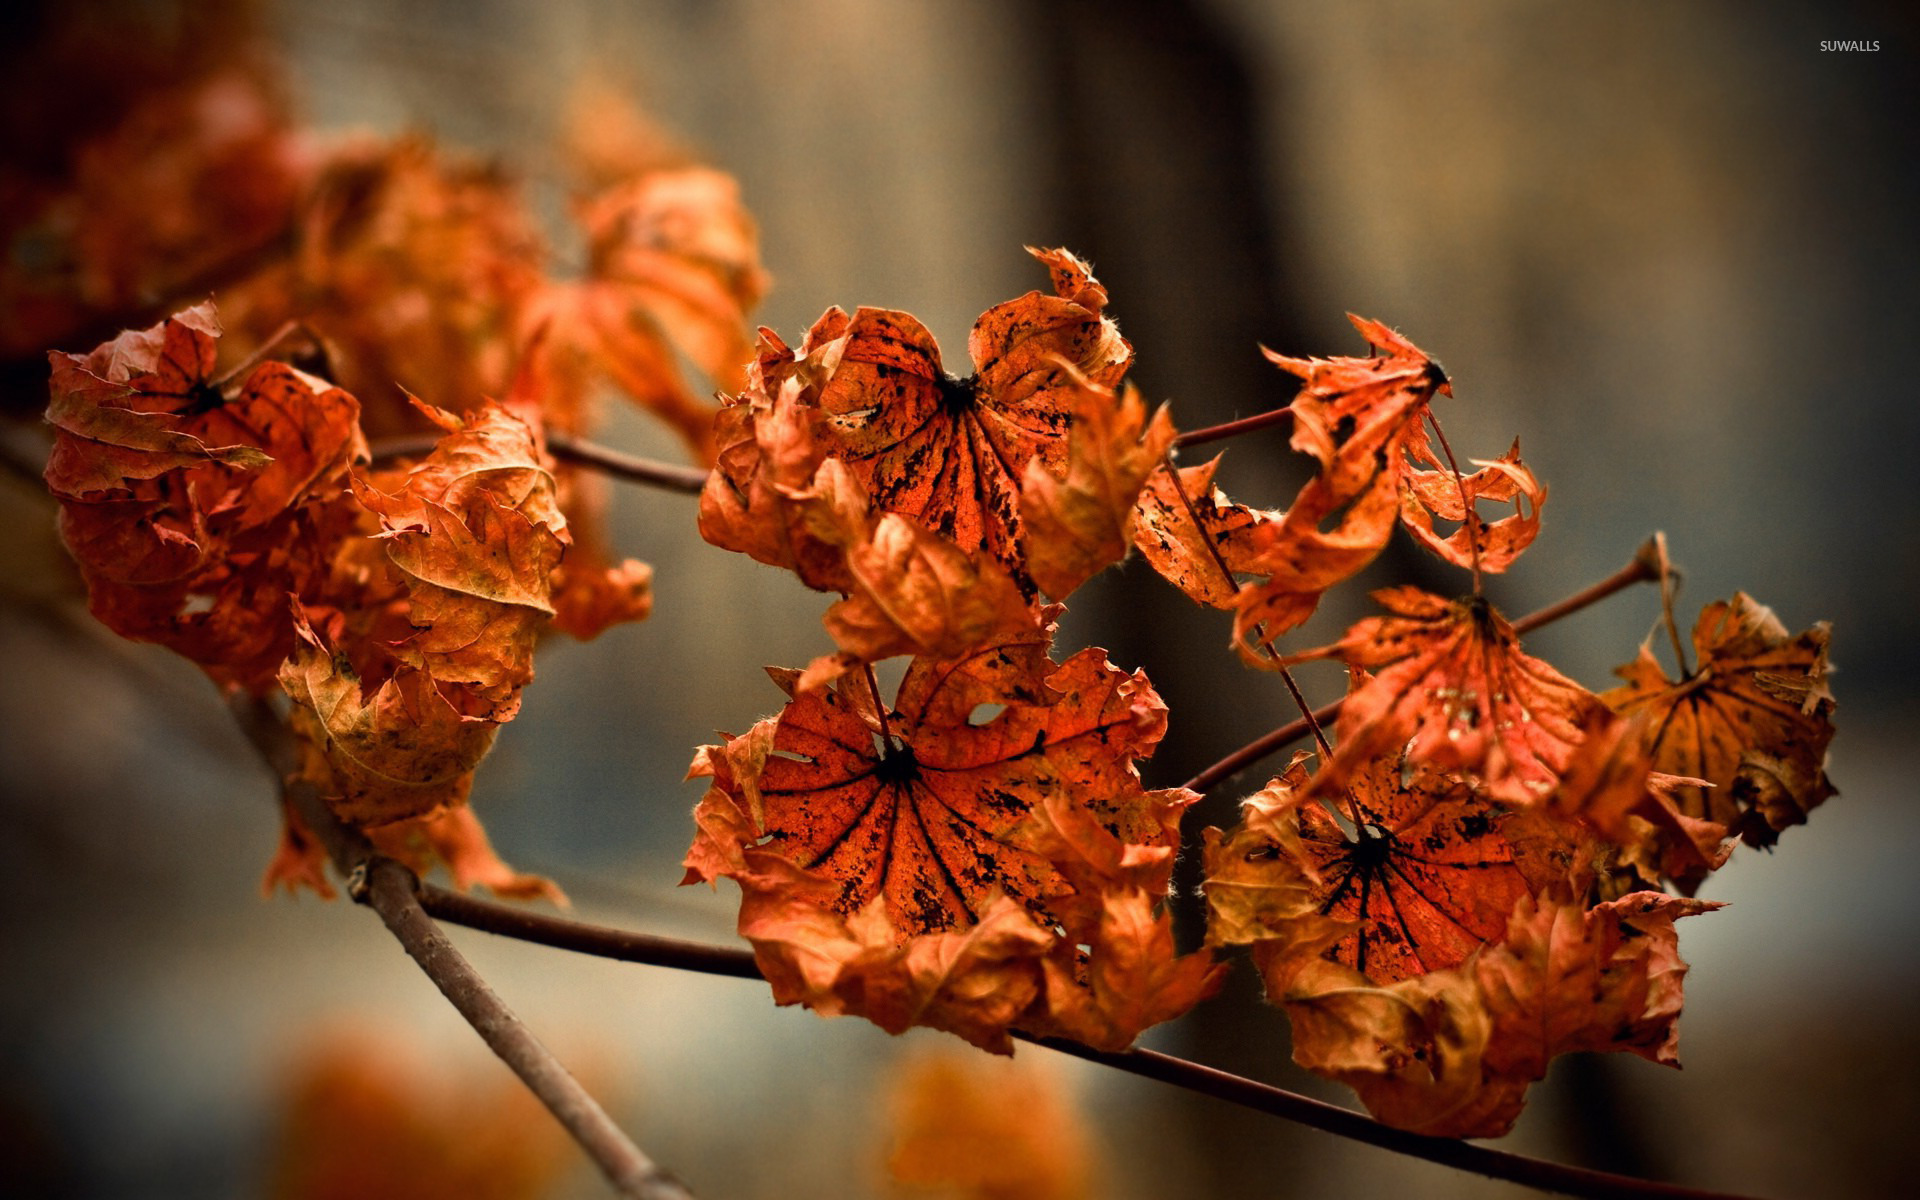 Drying Leaves Wallpaper Photography Wallpapers 15456